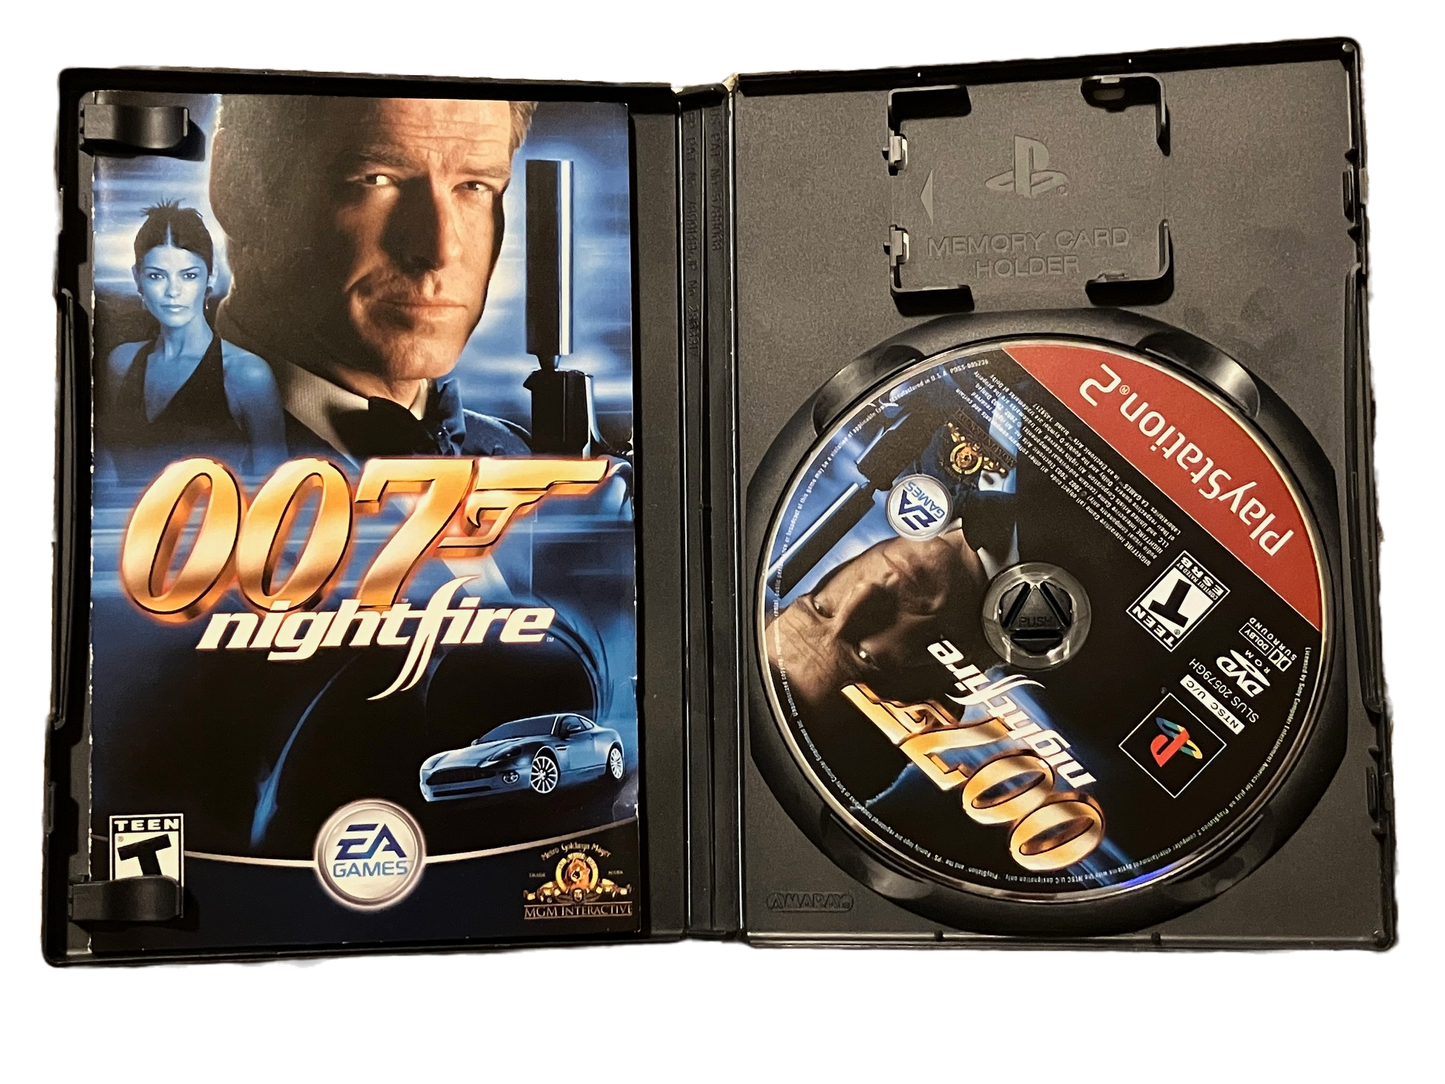 007 Nightfire Sony PlayStation 2 PS2 Complete